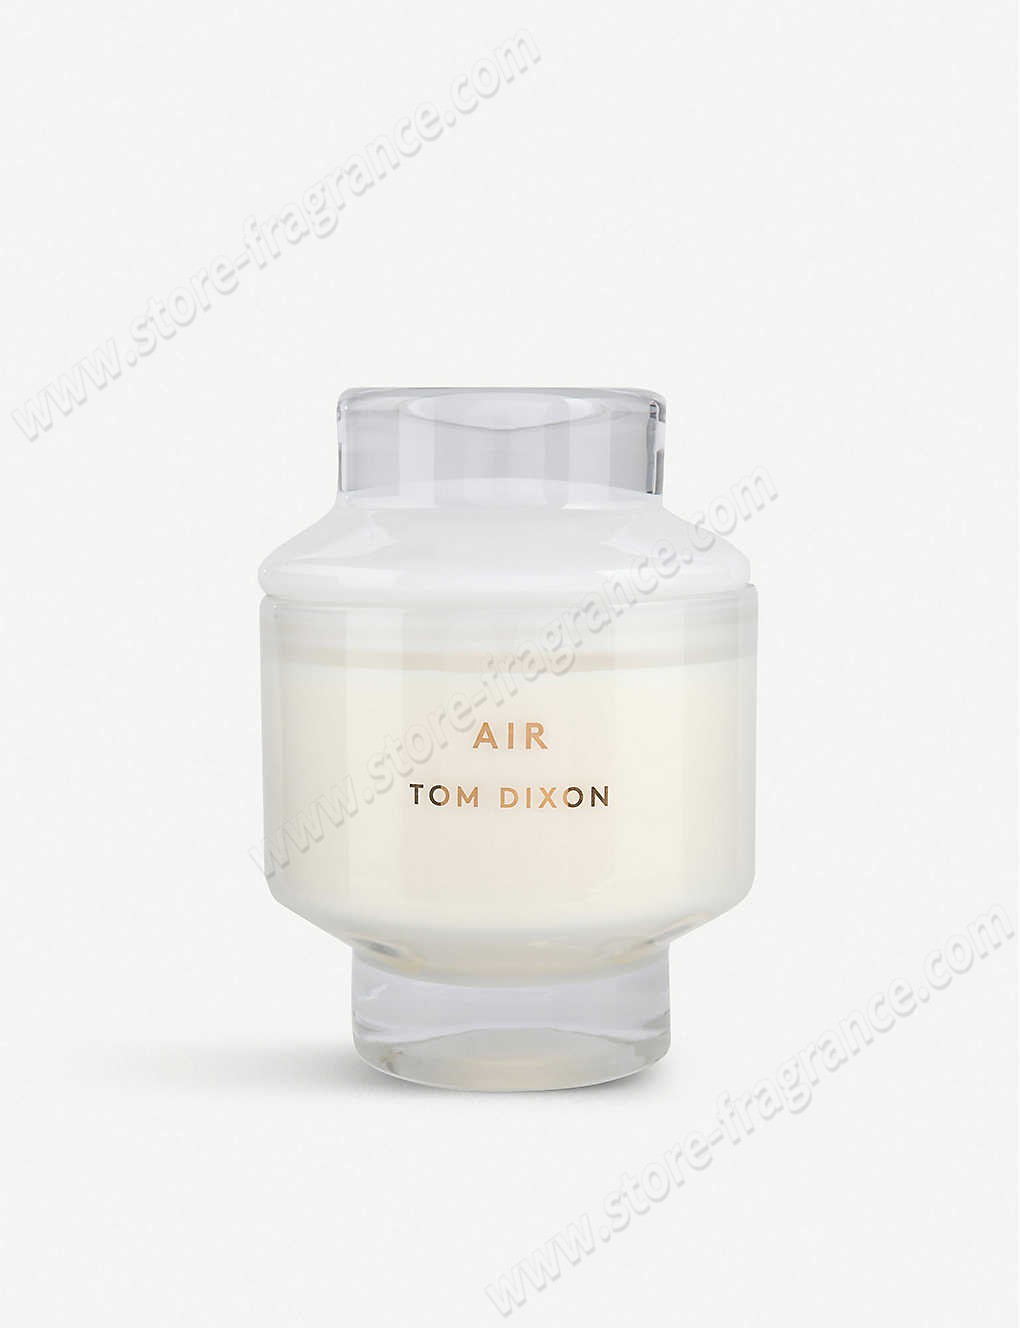 TOM DIXON/Scent Air large candle 4.78kg ✿ Discount Store - TOM DIXON/Scent Air large candle 4.78kg ✿ Discount Store